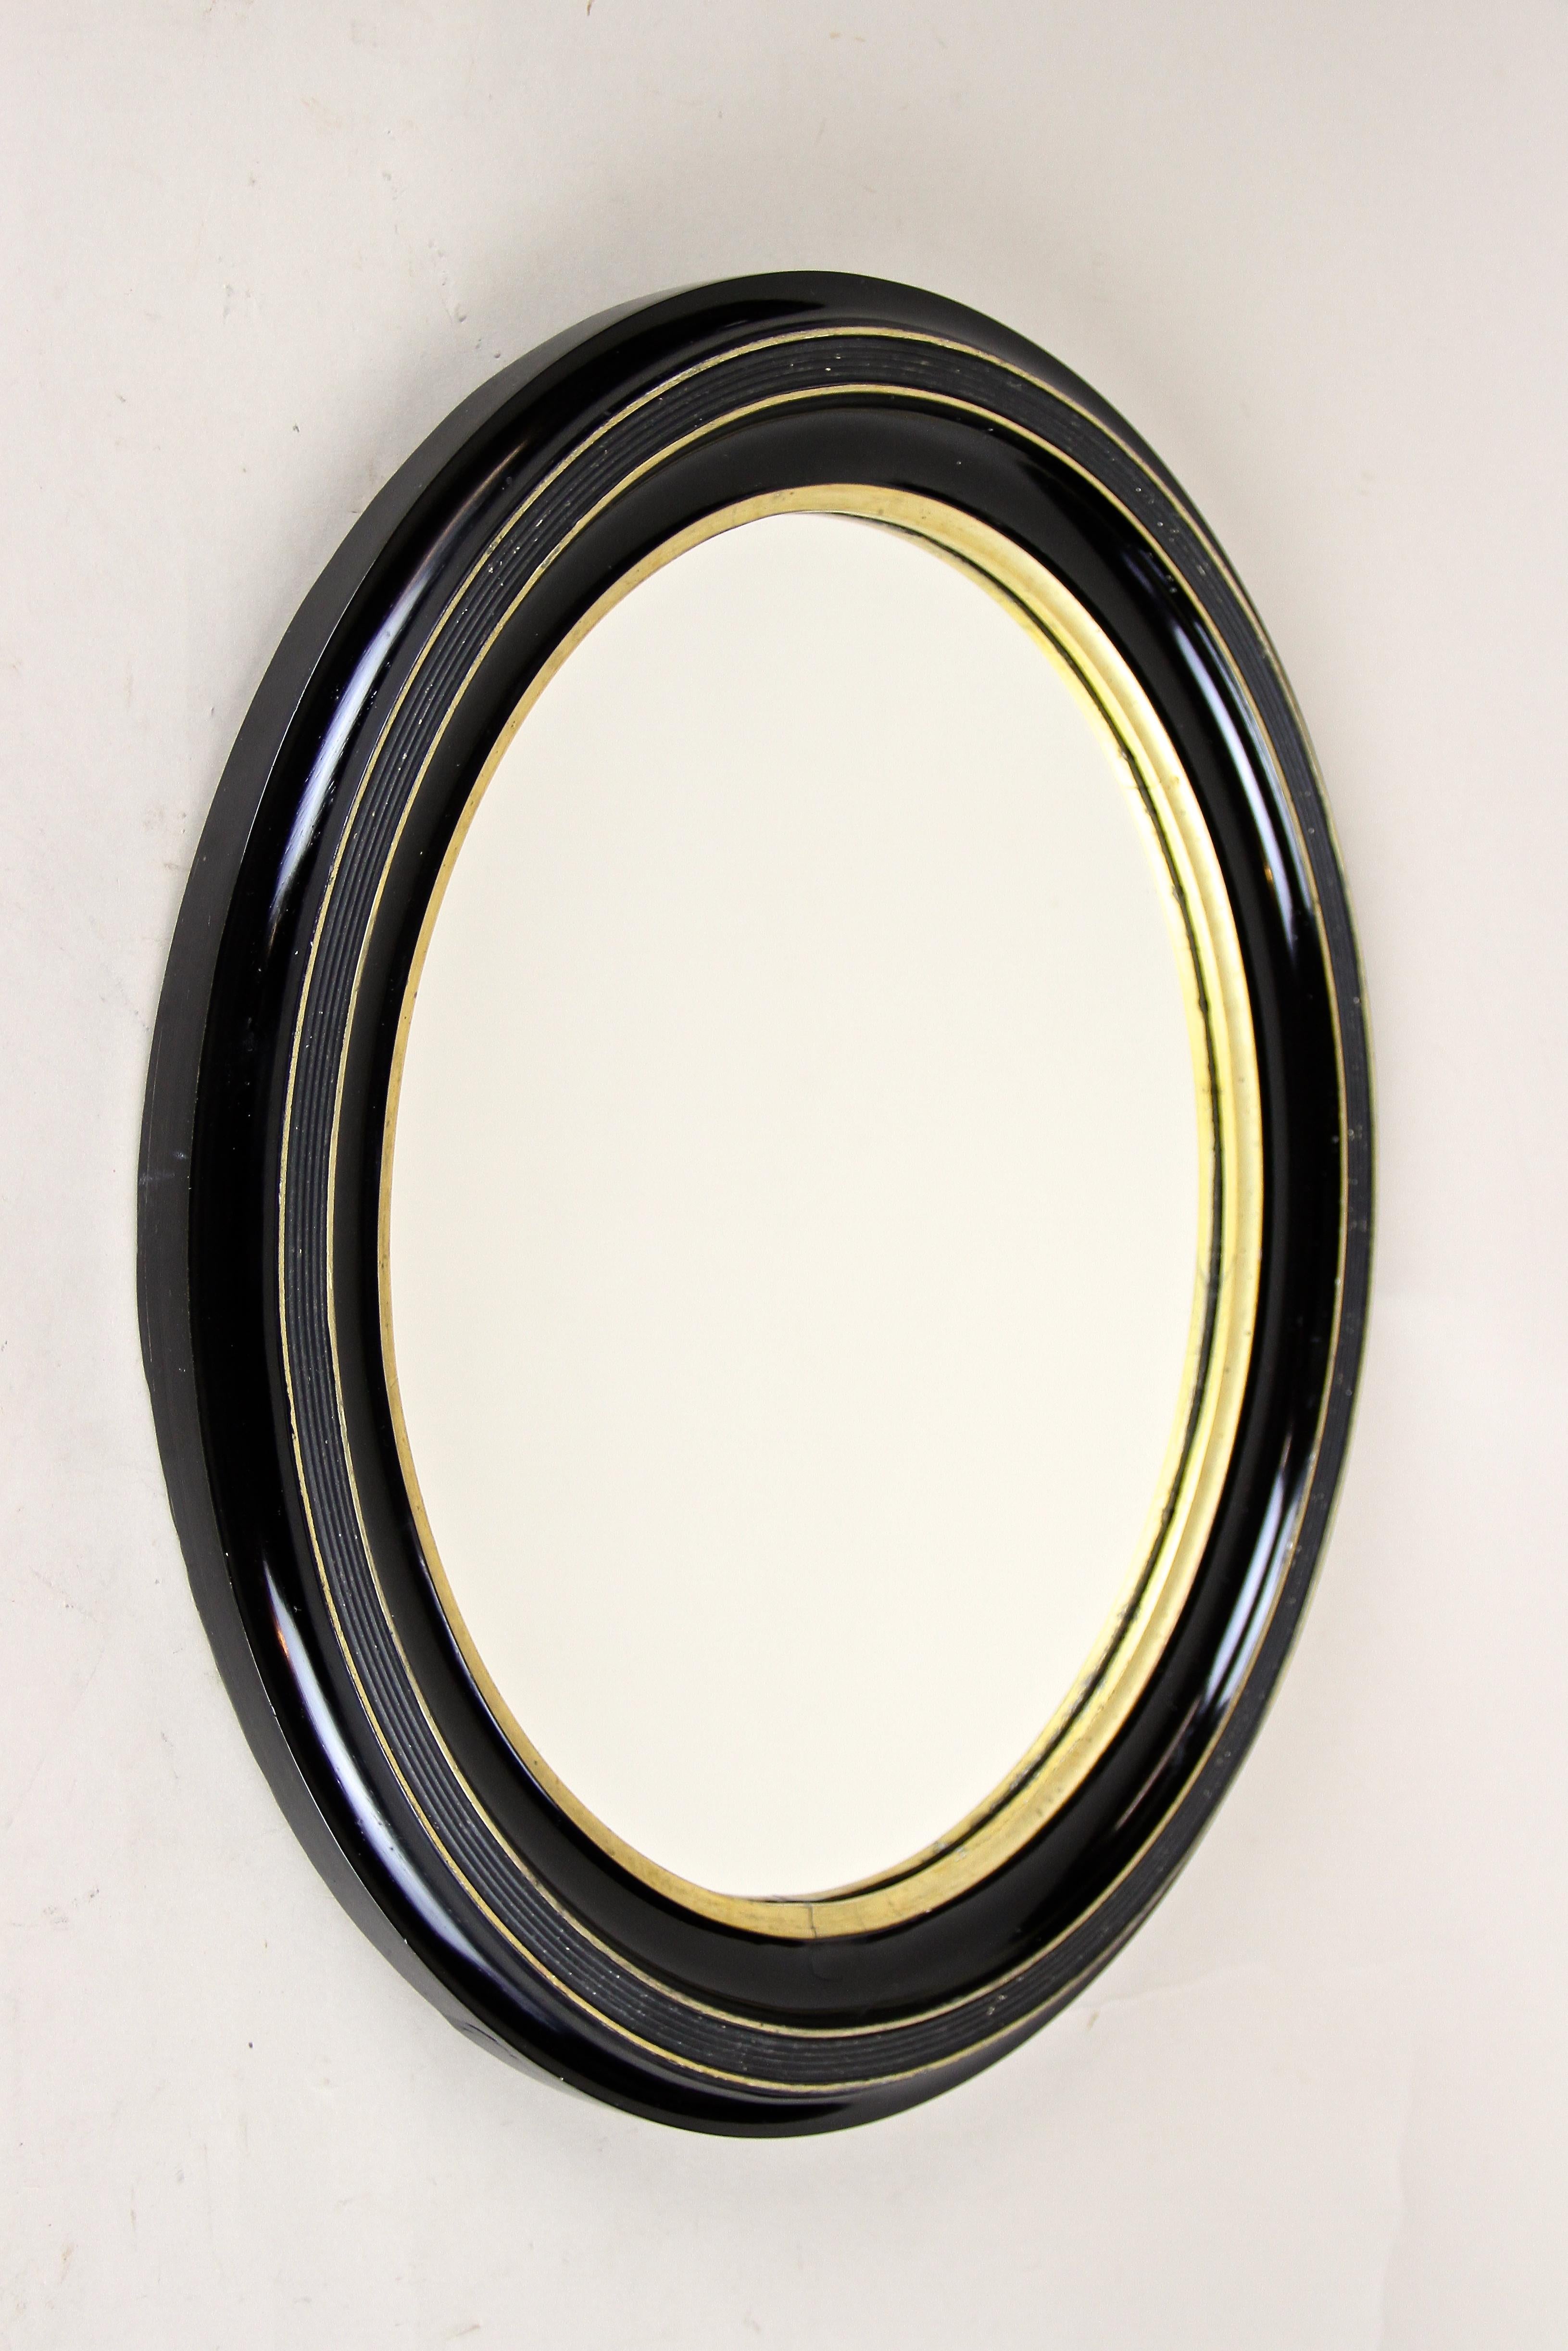 Stunning oval Art Nouveau wall mirror artfully processed in Vienna/ Austria at the beginning of the 20th century. The slightly grooved solid wooden oval frame from circa 1900 shows a black lacquered surface with an additional hand-polished shellac